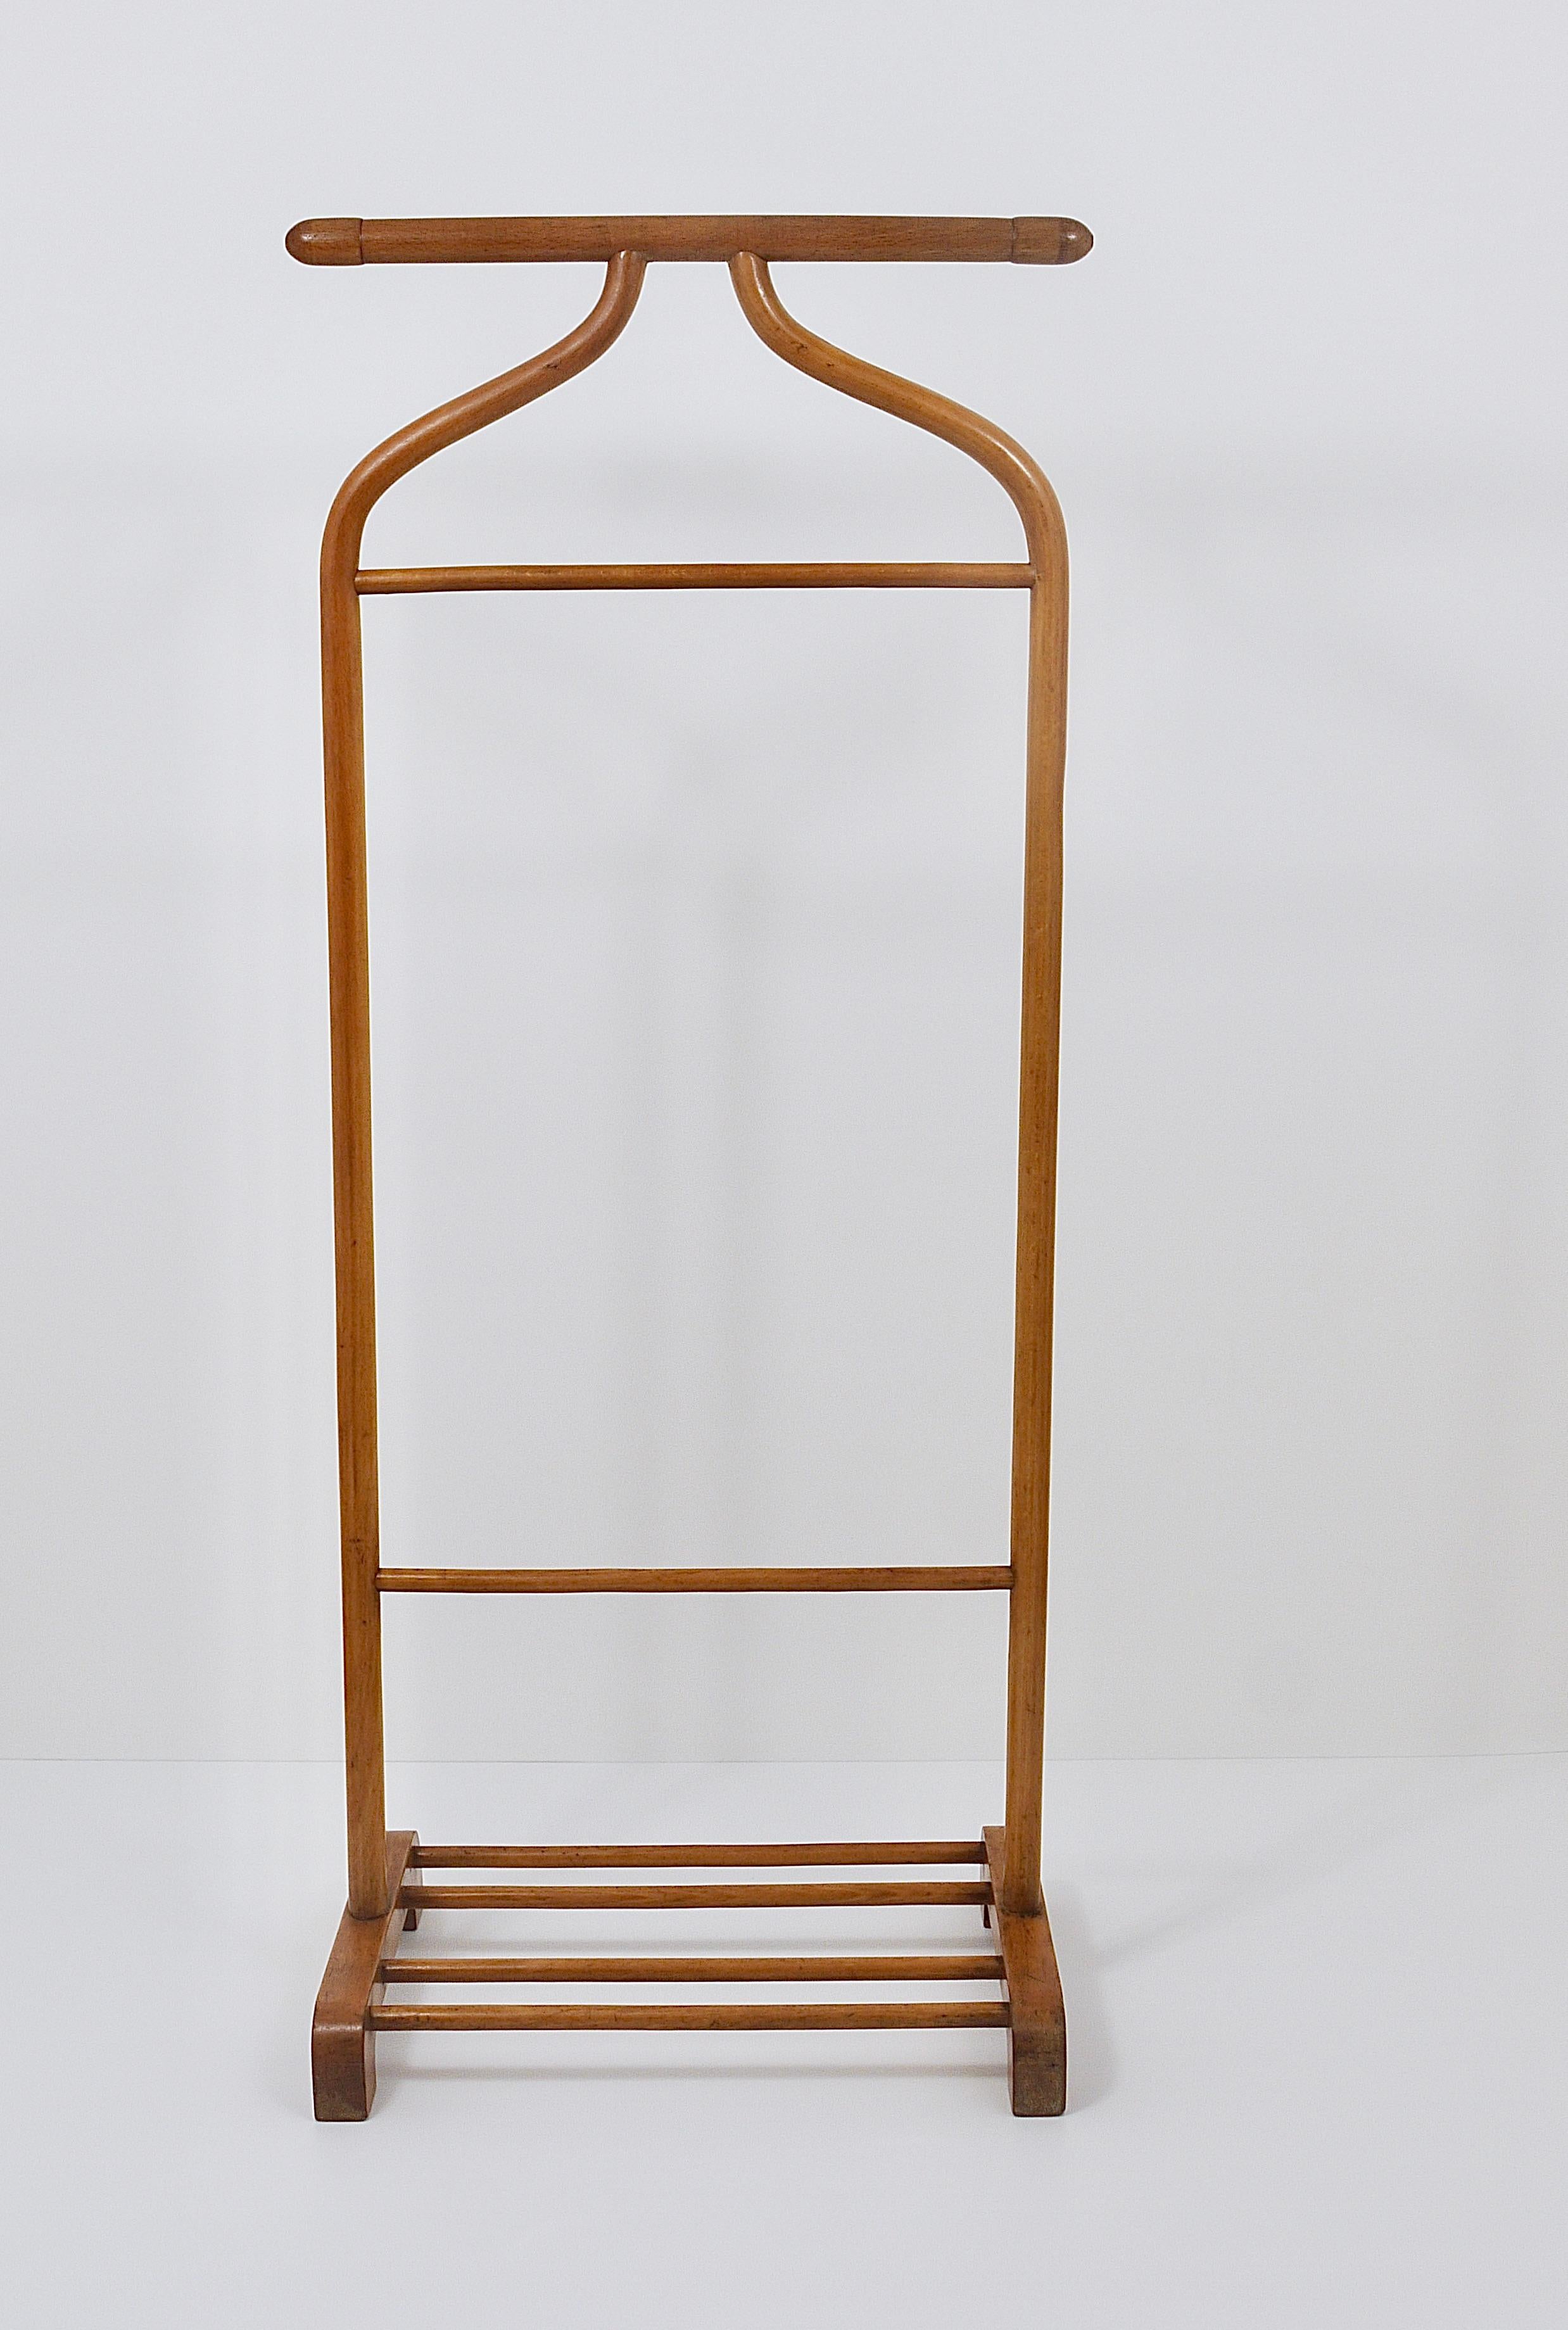 An elegant Art Deco gentleman’s valet / clothing or dressing stand from the 1920s, designed and executed by Gebrüder Thonet Vienna in Austria. Made of bentwood beech. With a coat hanger and a pant bar, it has been made to hold jacket, shirt, pants,